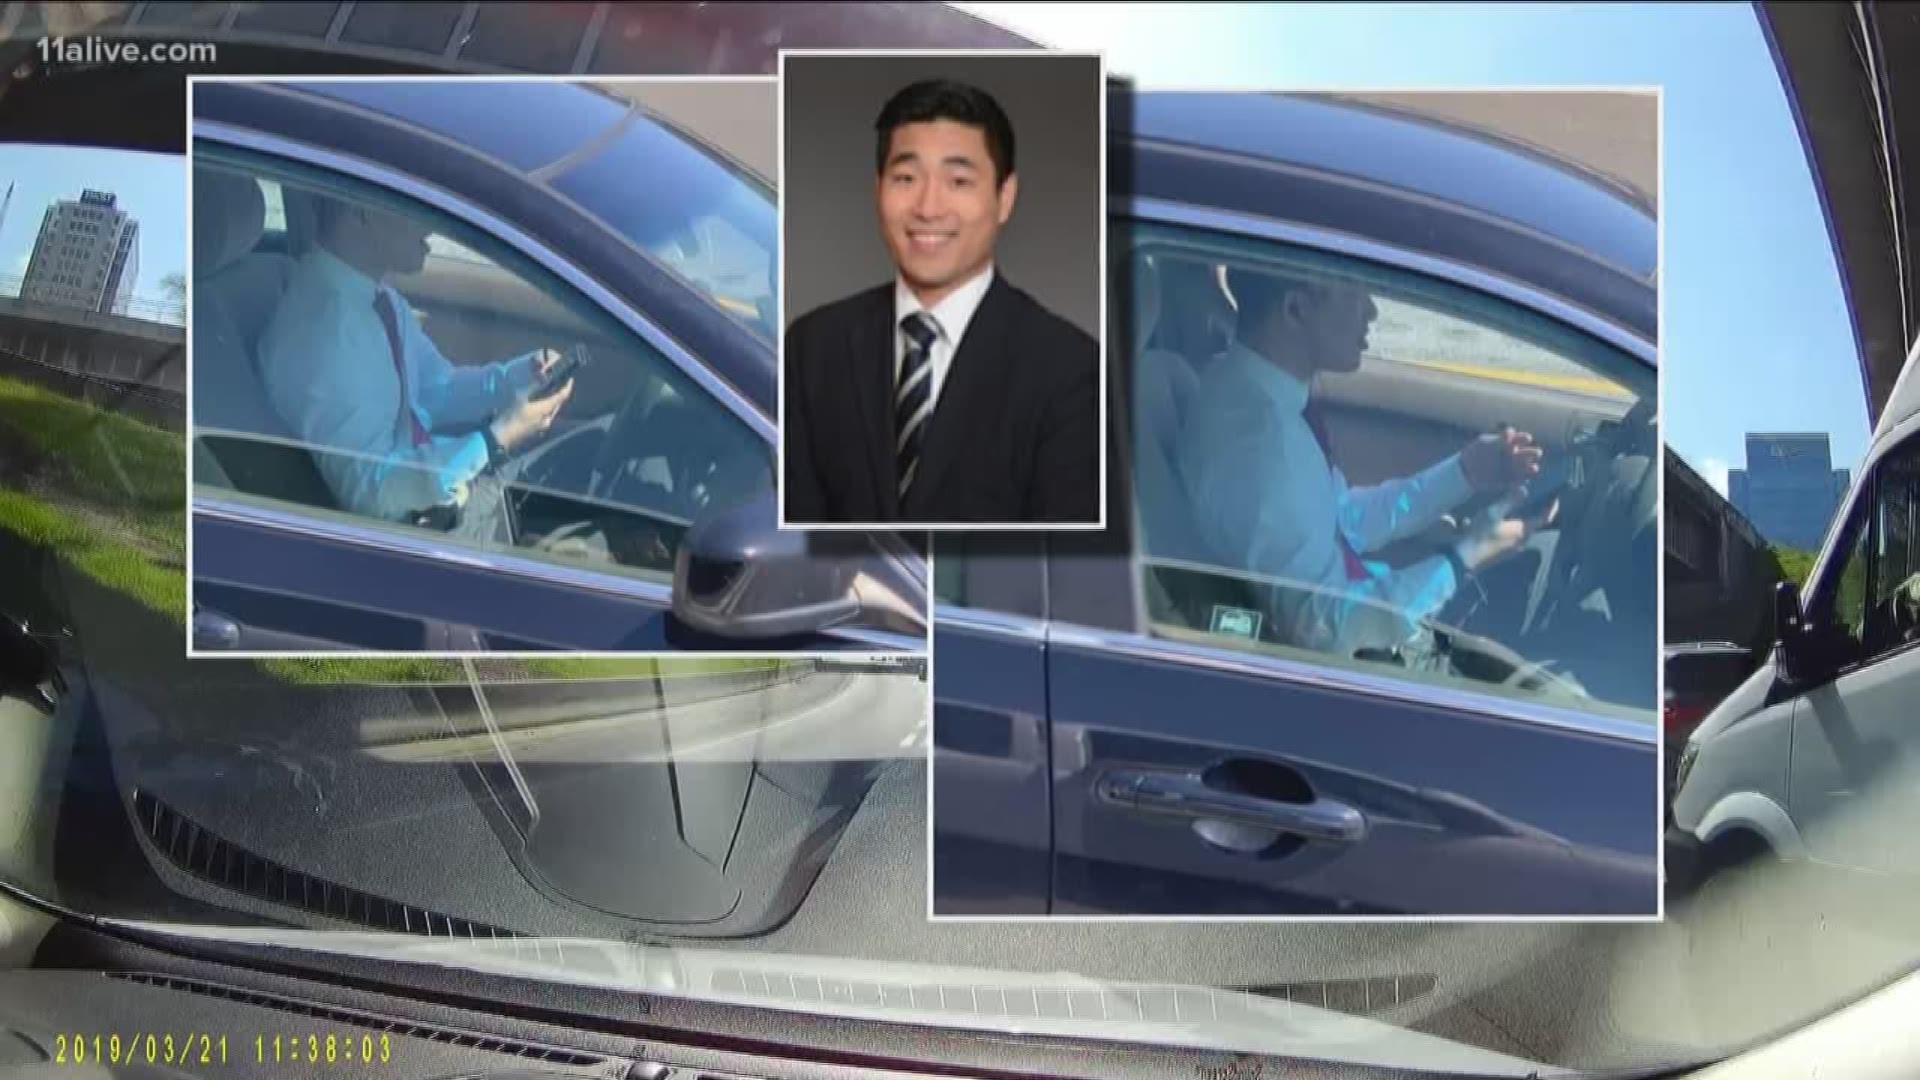 State Rep. Sam Park (D-Lawrenceville) said he was driving in the HOV lane and talking on his phone because he was stuck in traffic.